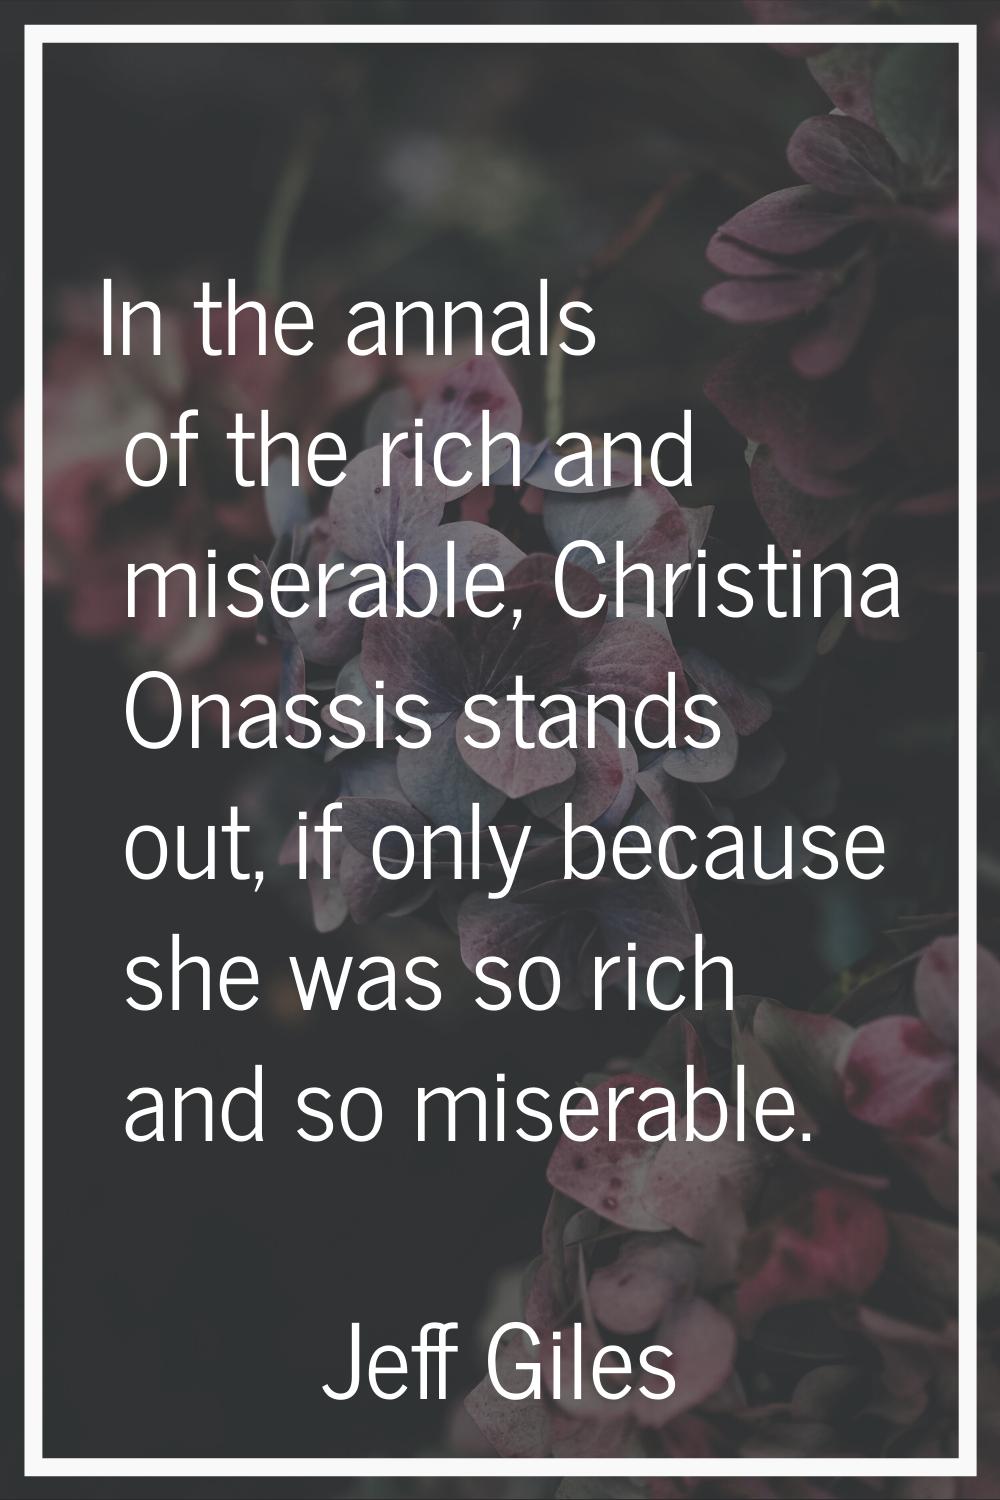 In the annals of the rich and miserable, Christina Onassis stands out, if only because she was so r